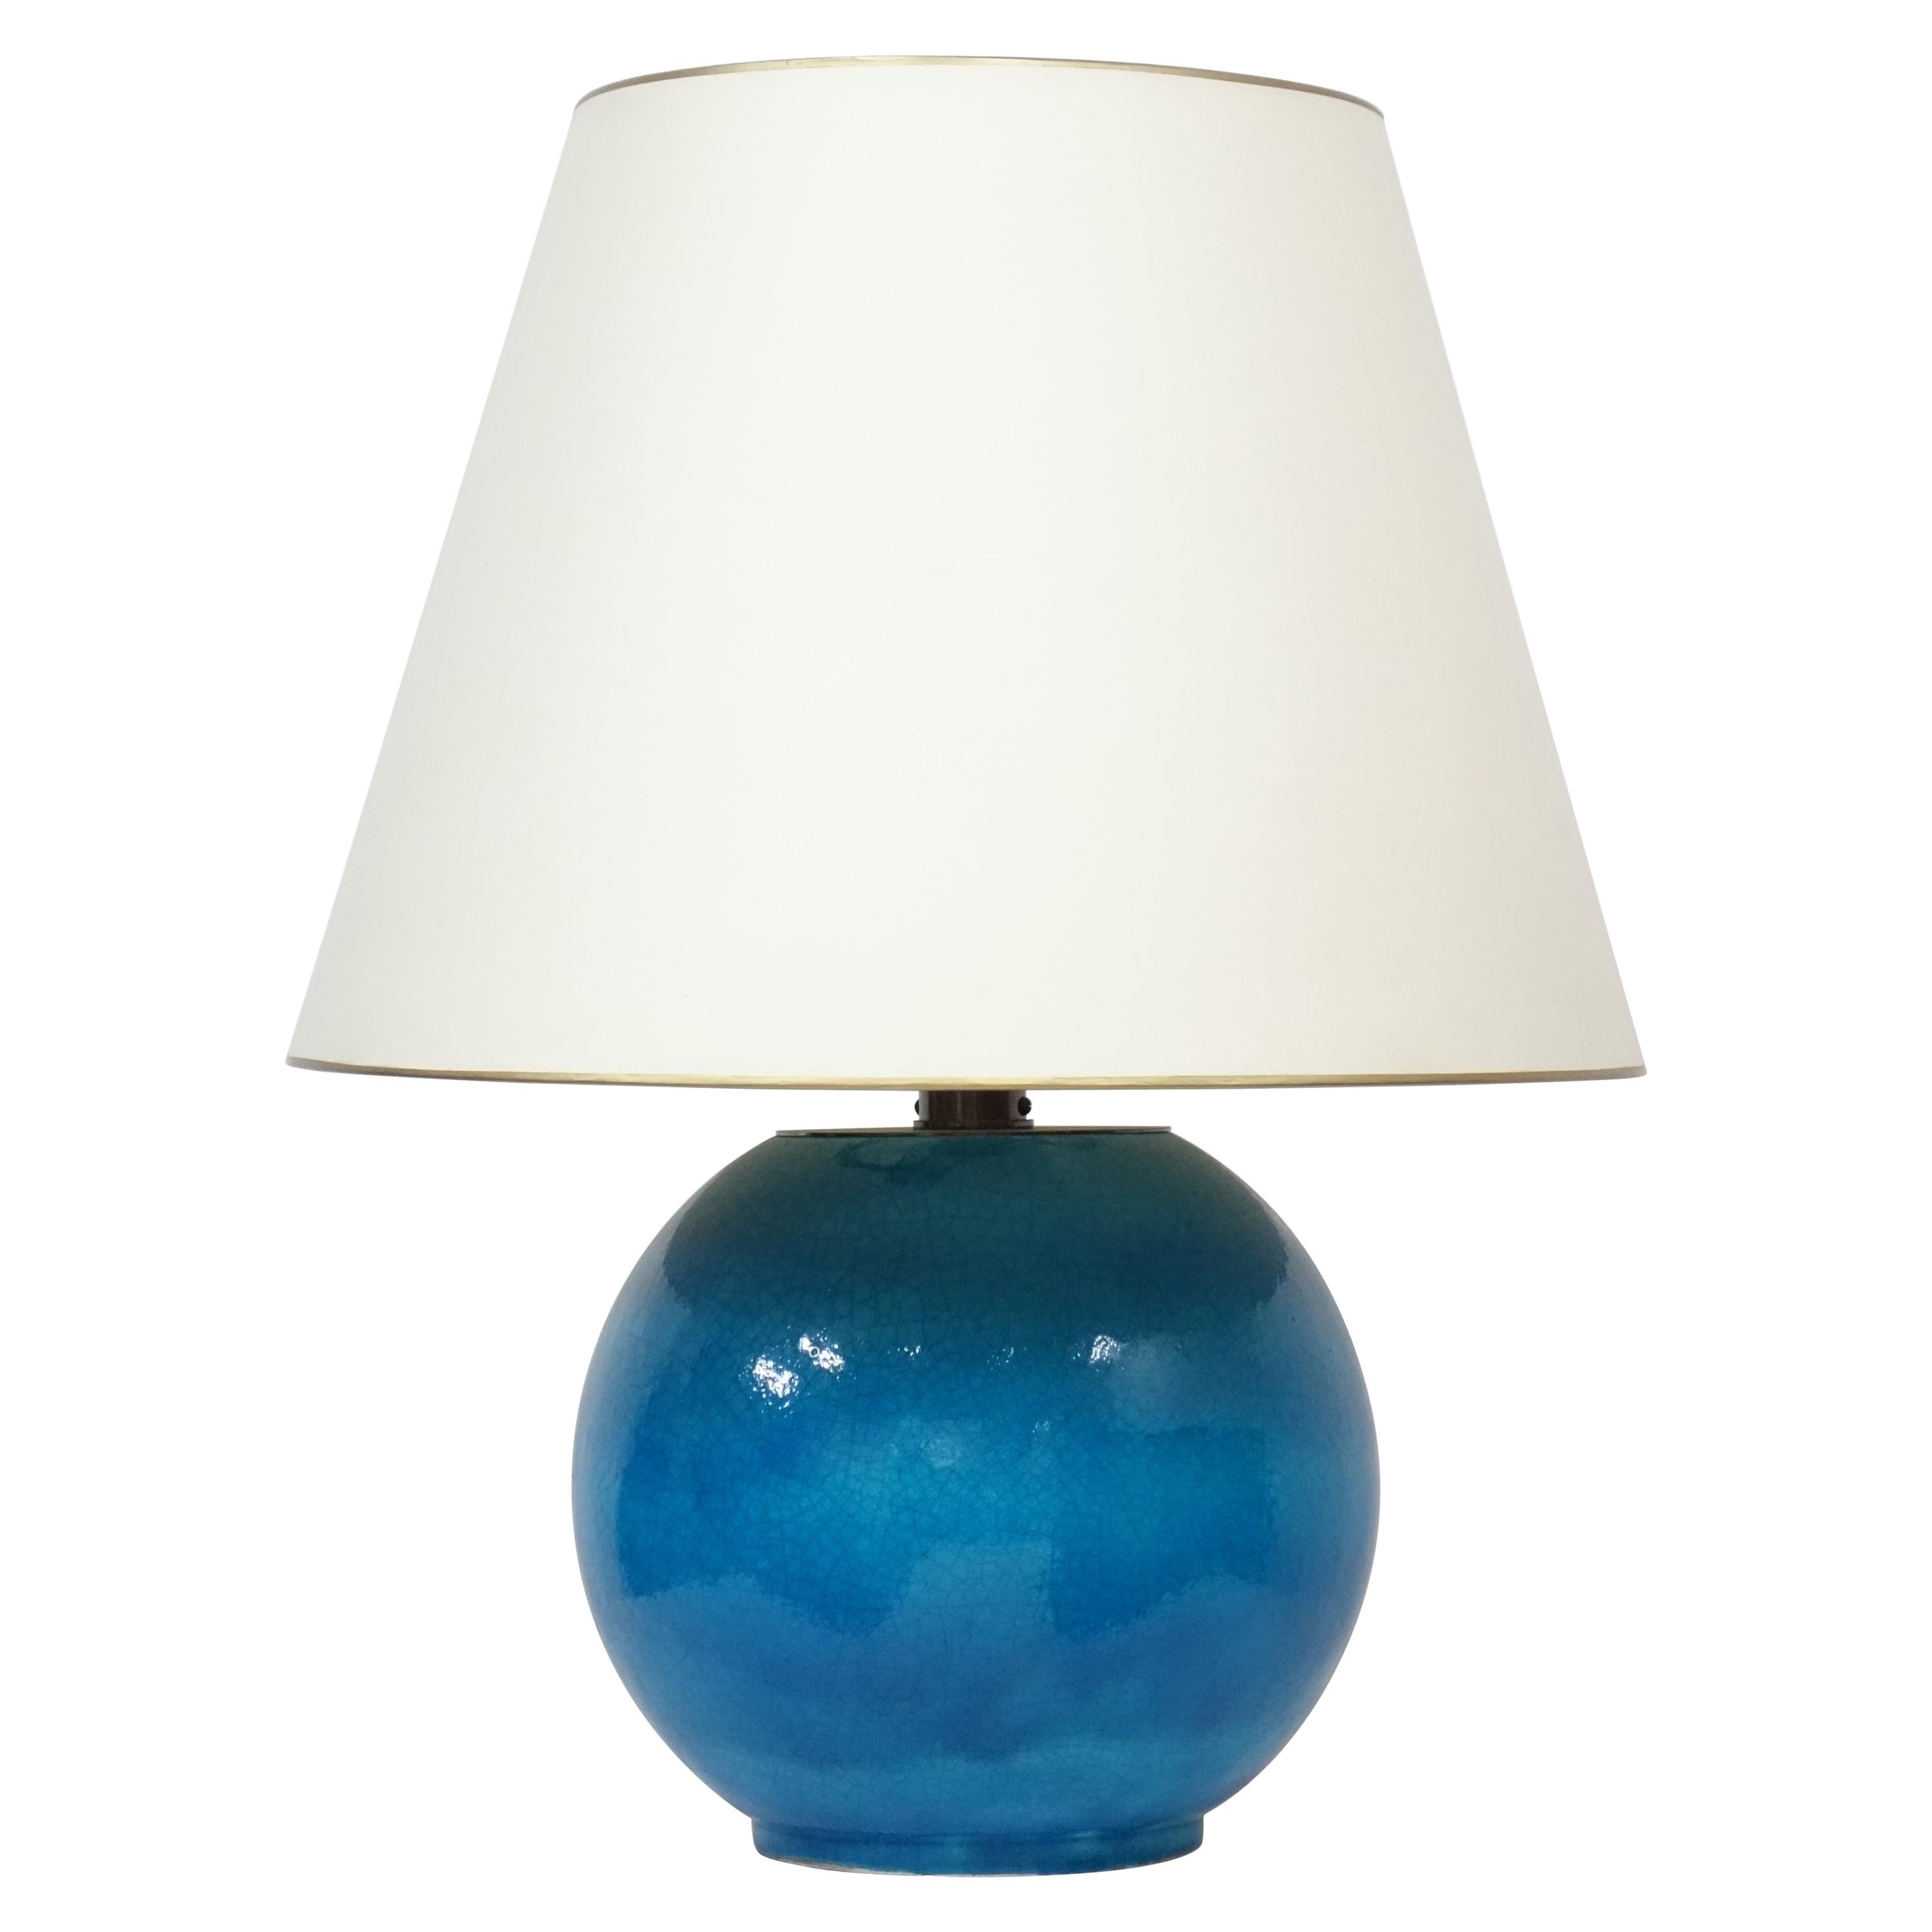 Blue Crazed Ceramic Table Lamp by Jean Besnard, circa 1930 For Sale